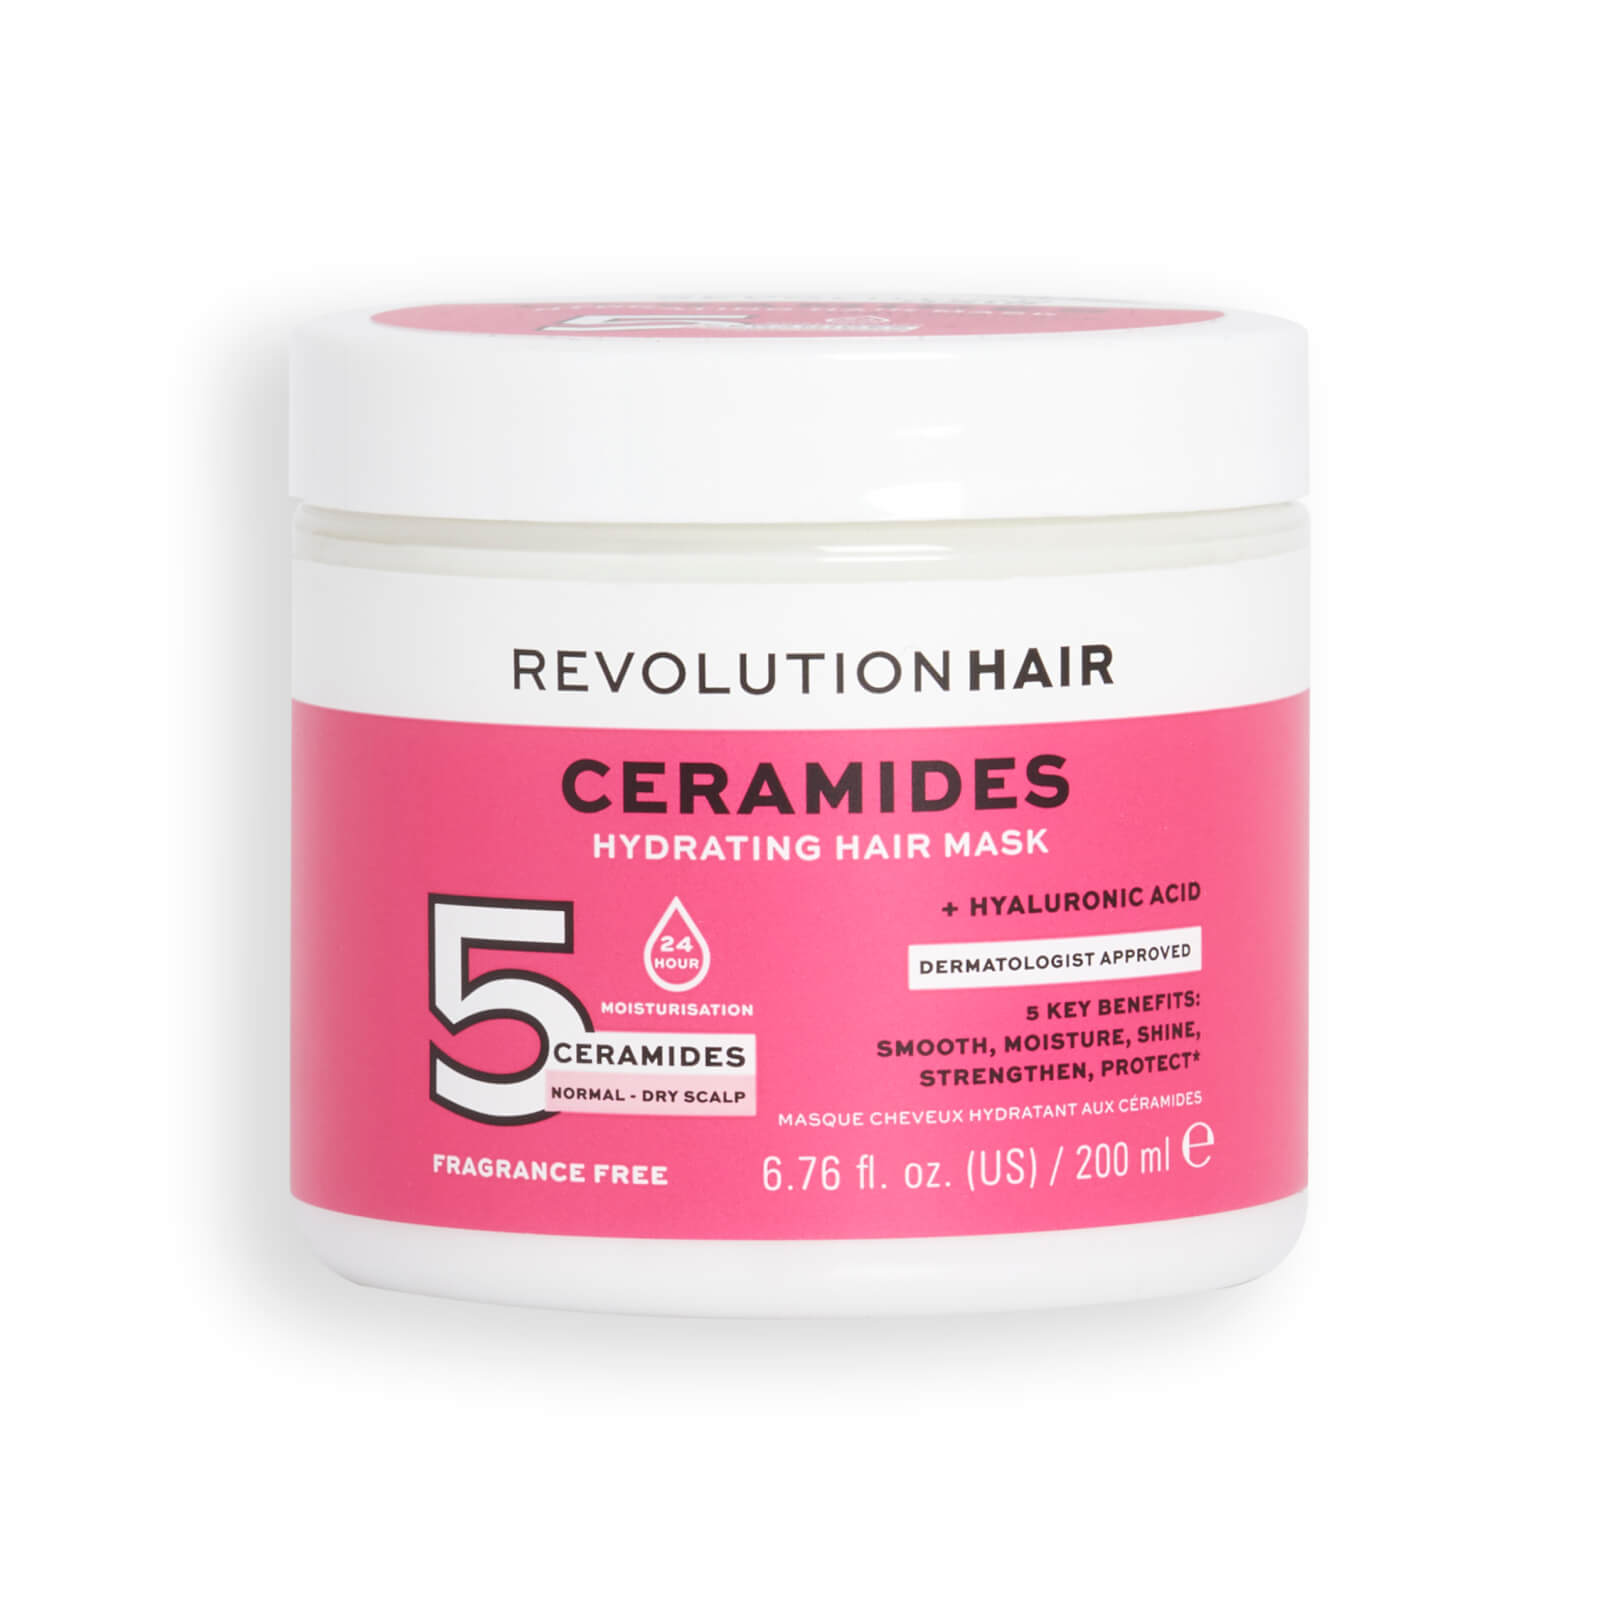 Photos - Facial Mask Revolution Haircare 5 Ceramides and Hyaluronic Acid Hydrating Hair Mask 20 